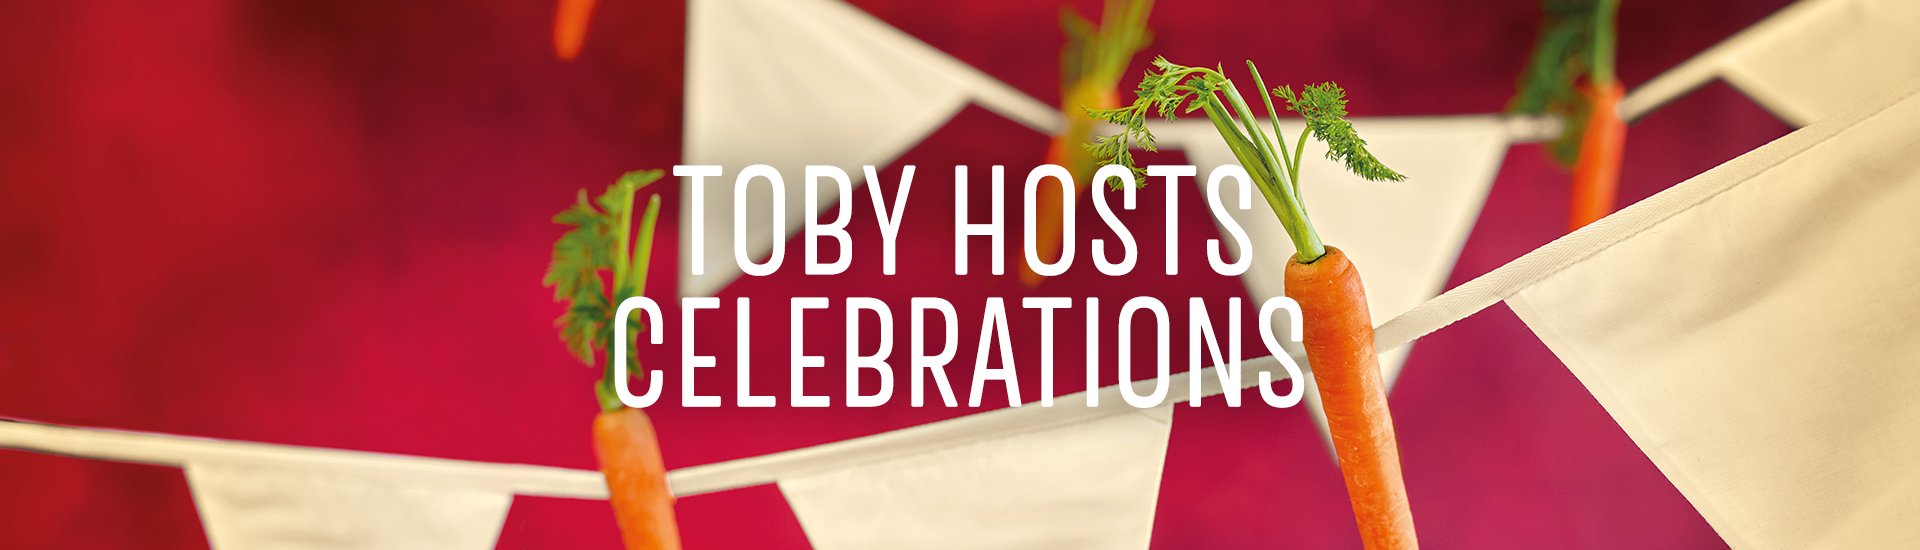 toby-bookablespace-celebrations-banner.jpg